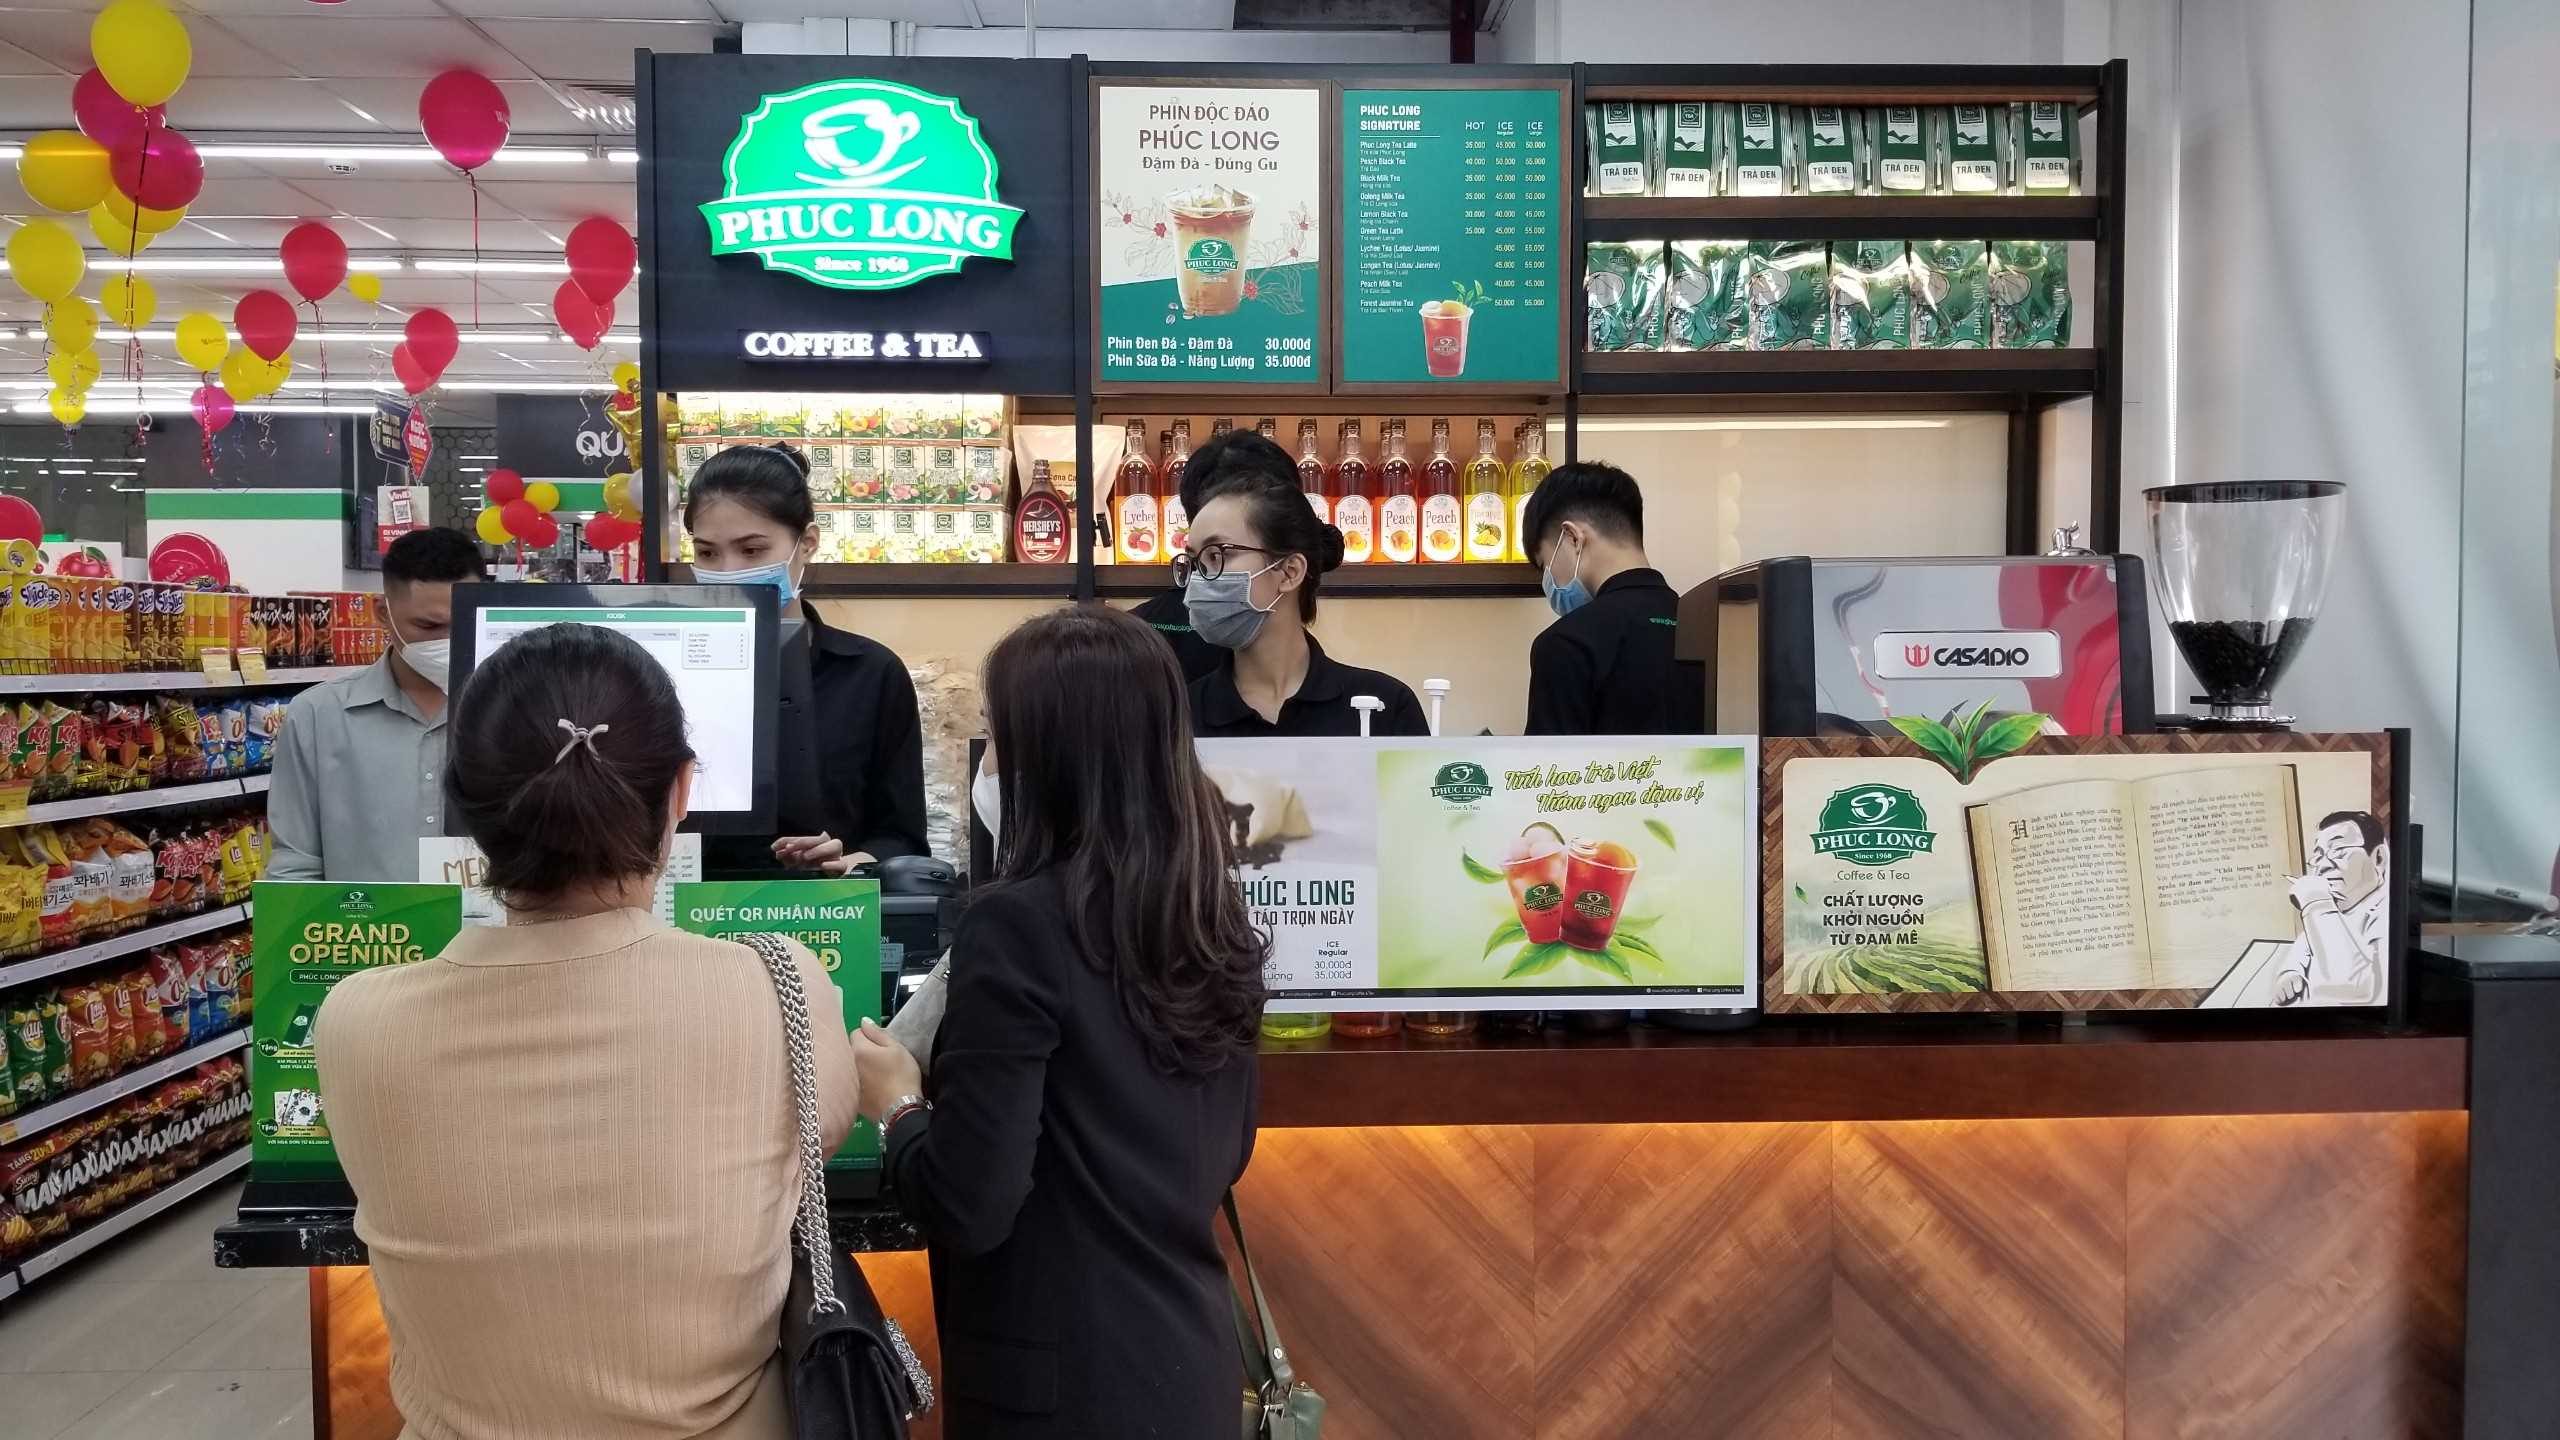 Vietnam's Masan increases stake in local beverage chain Phuc Long to 51%